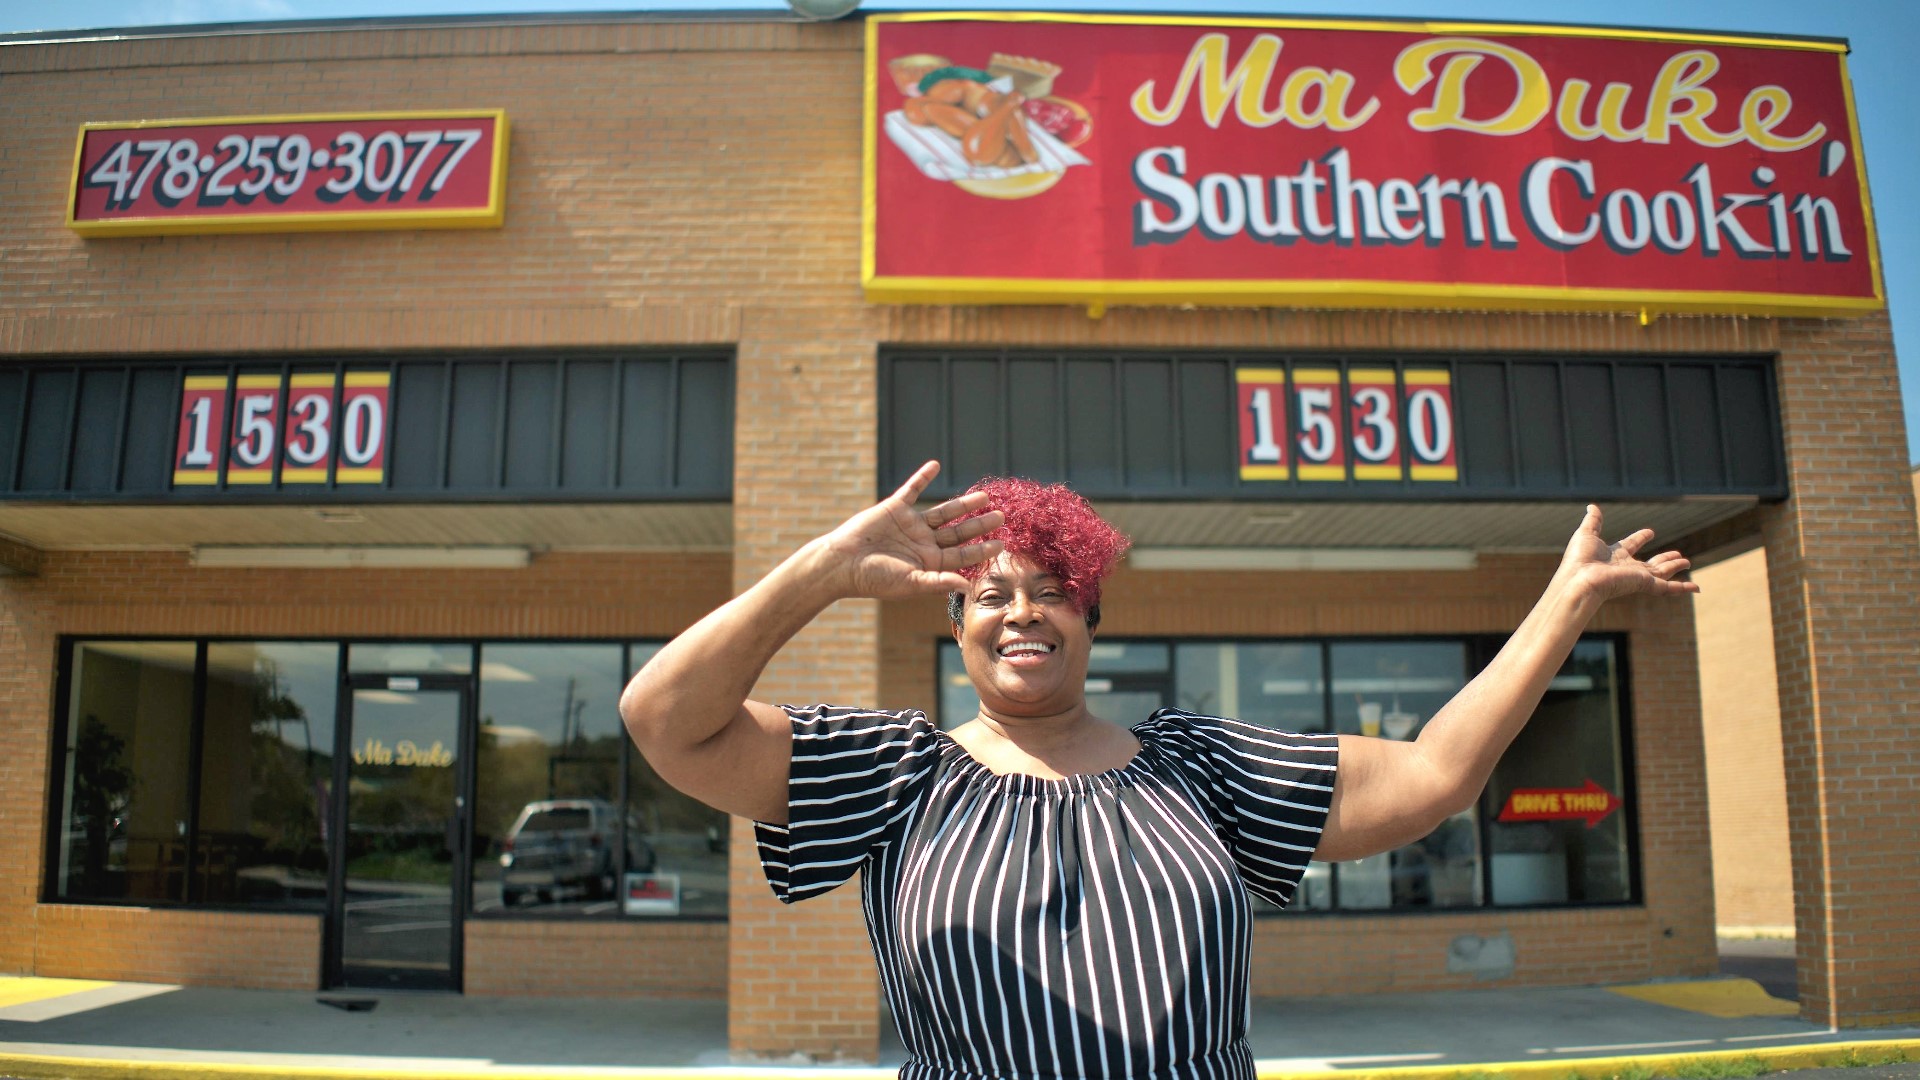 Teresa Cohen is back in Central Georgia and ready to serve traditional Southern meals to customers at her new restaurant 'Ma Duke' in Macon